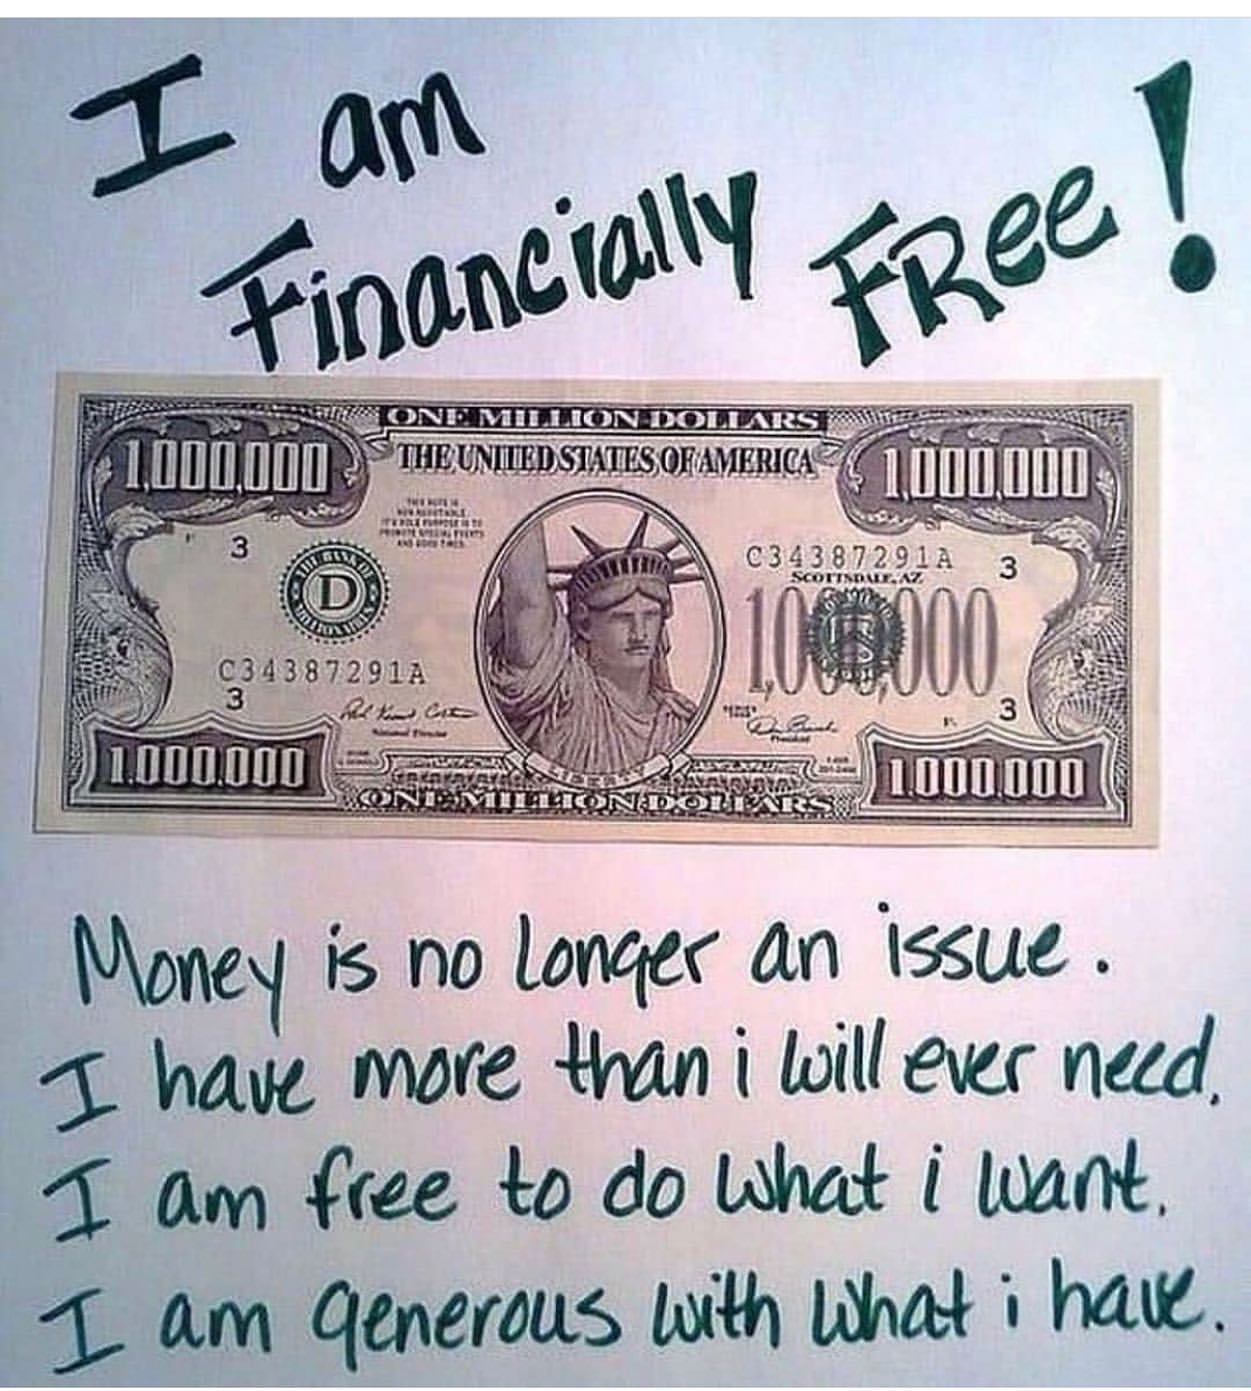 I am financially free. Money is no longer an issue. I have more than I will ever need. I am free to do what I want. I am generous with what I have.